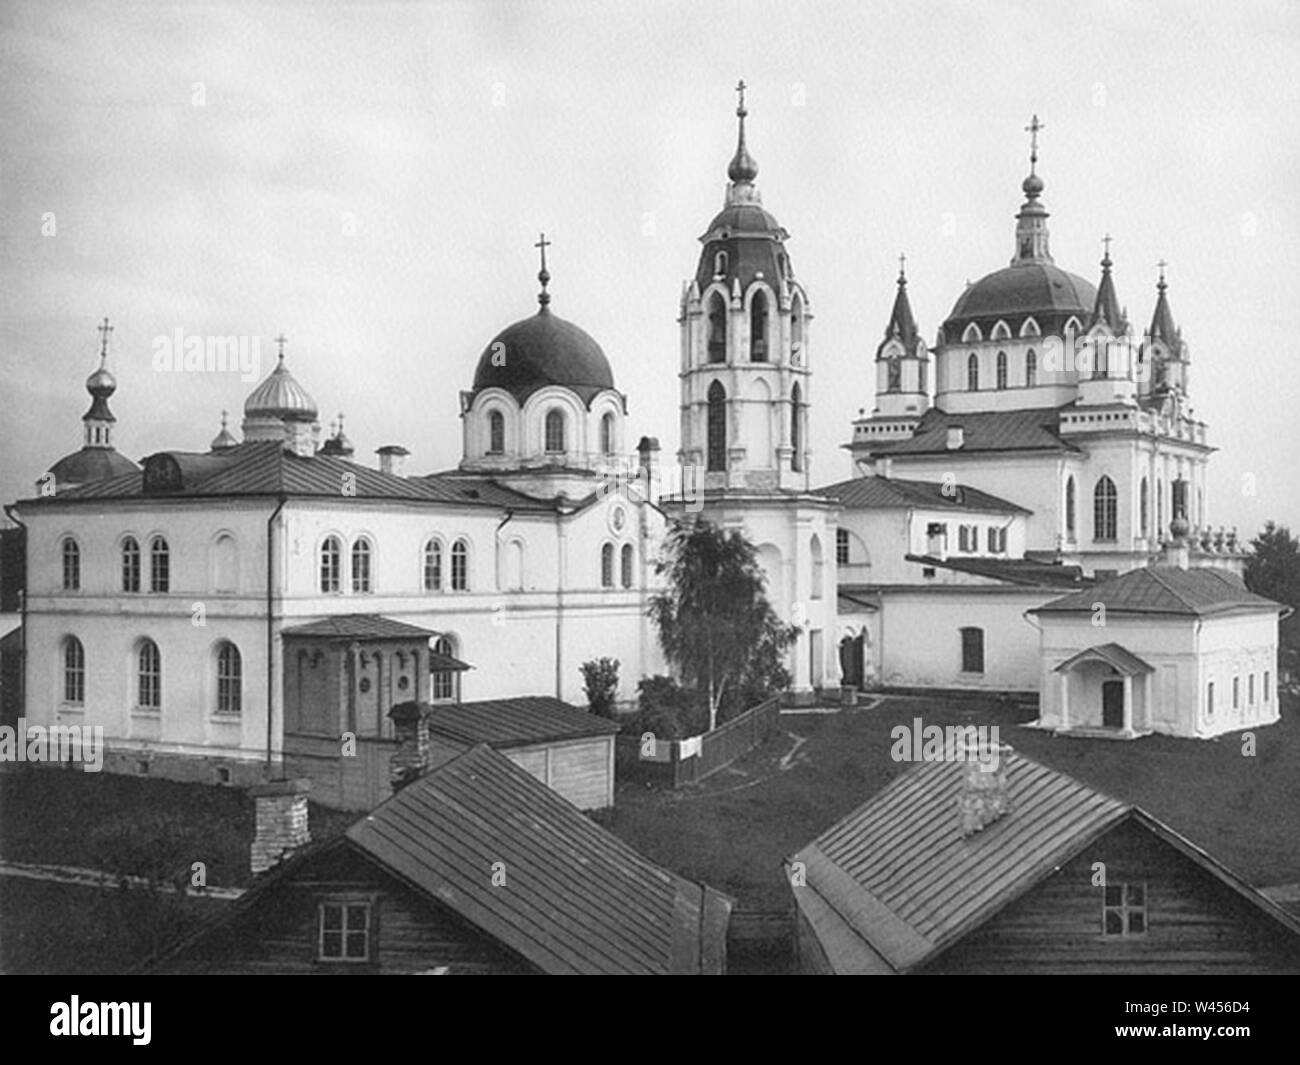 Conception monastery Black and White Stock Photos & Images - Alamy